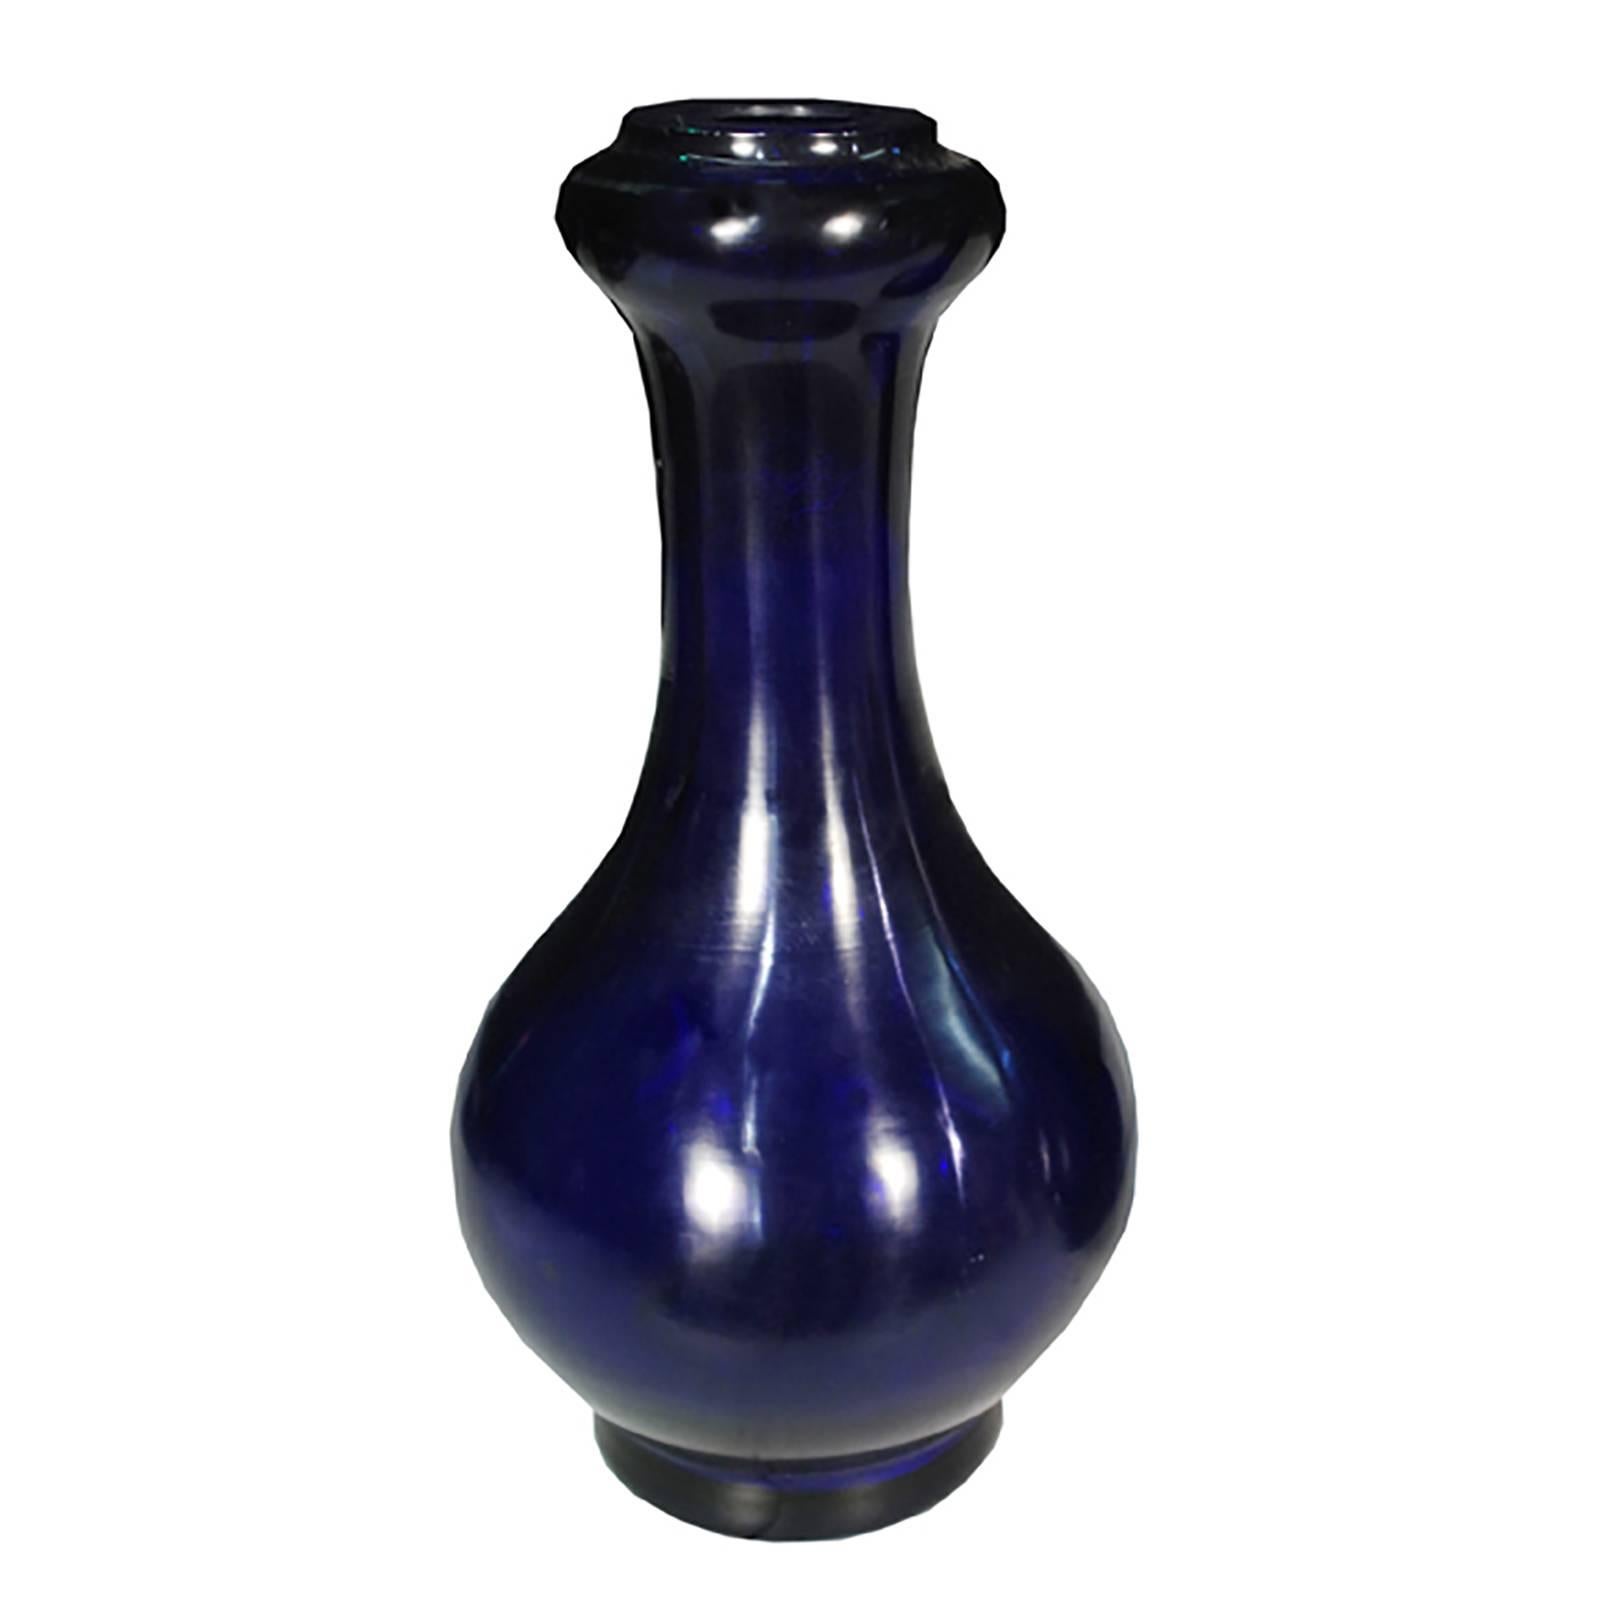 Artisans created this pair of early 20th century cobalt Peking glass vases using techniques developed hundreds of years ago in the Imperial workshops. The process involves hand-crafting layers and layers of molten glass and then carving and